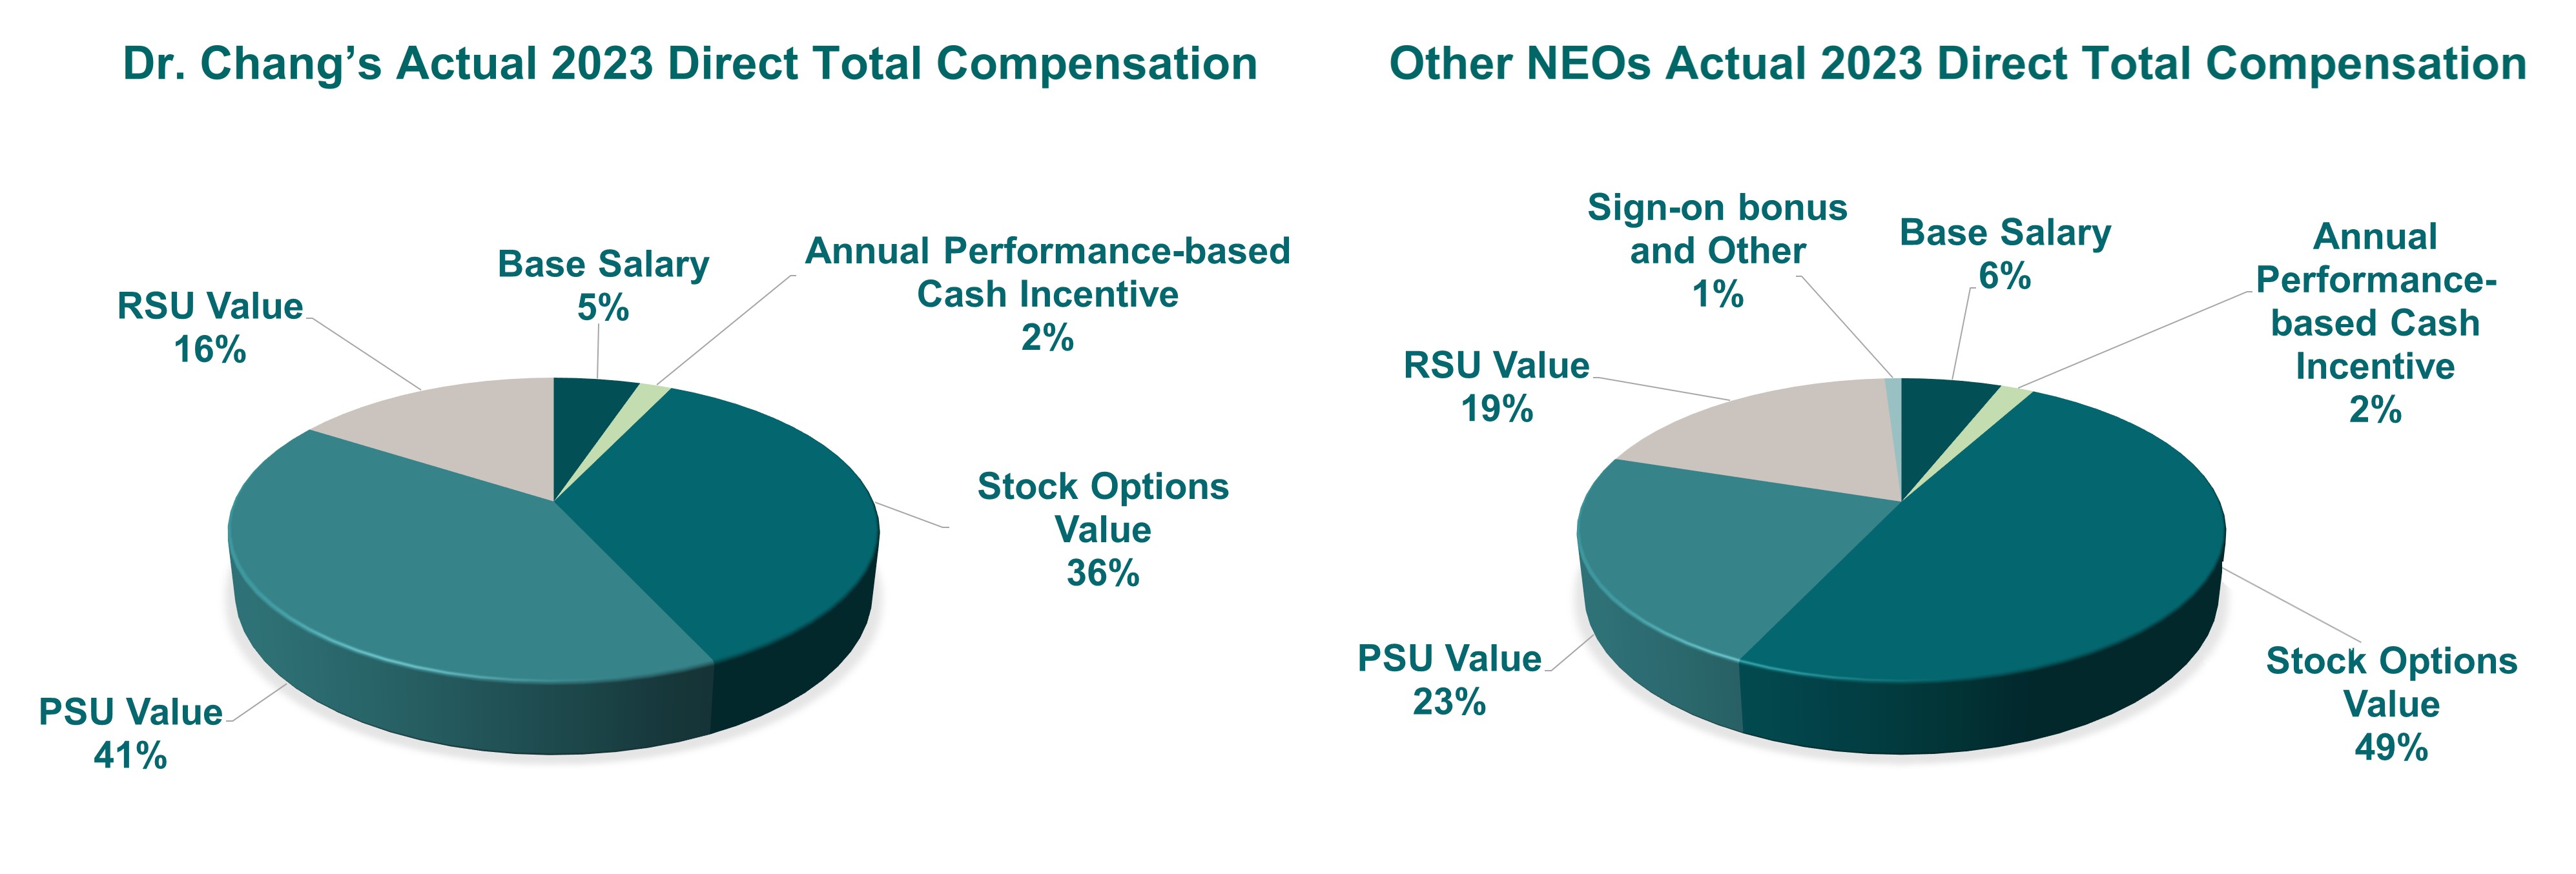 CEO NEO Comp Percentages.jpg